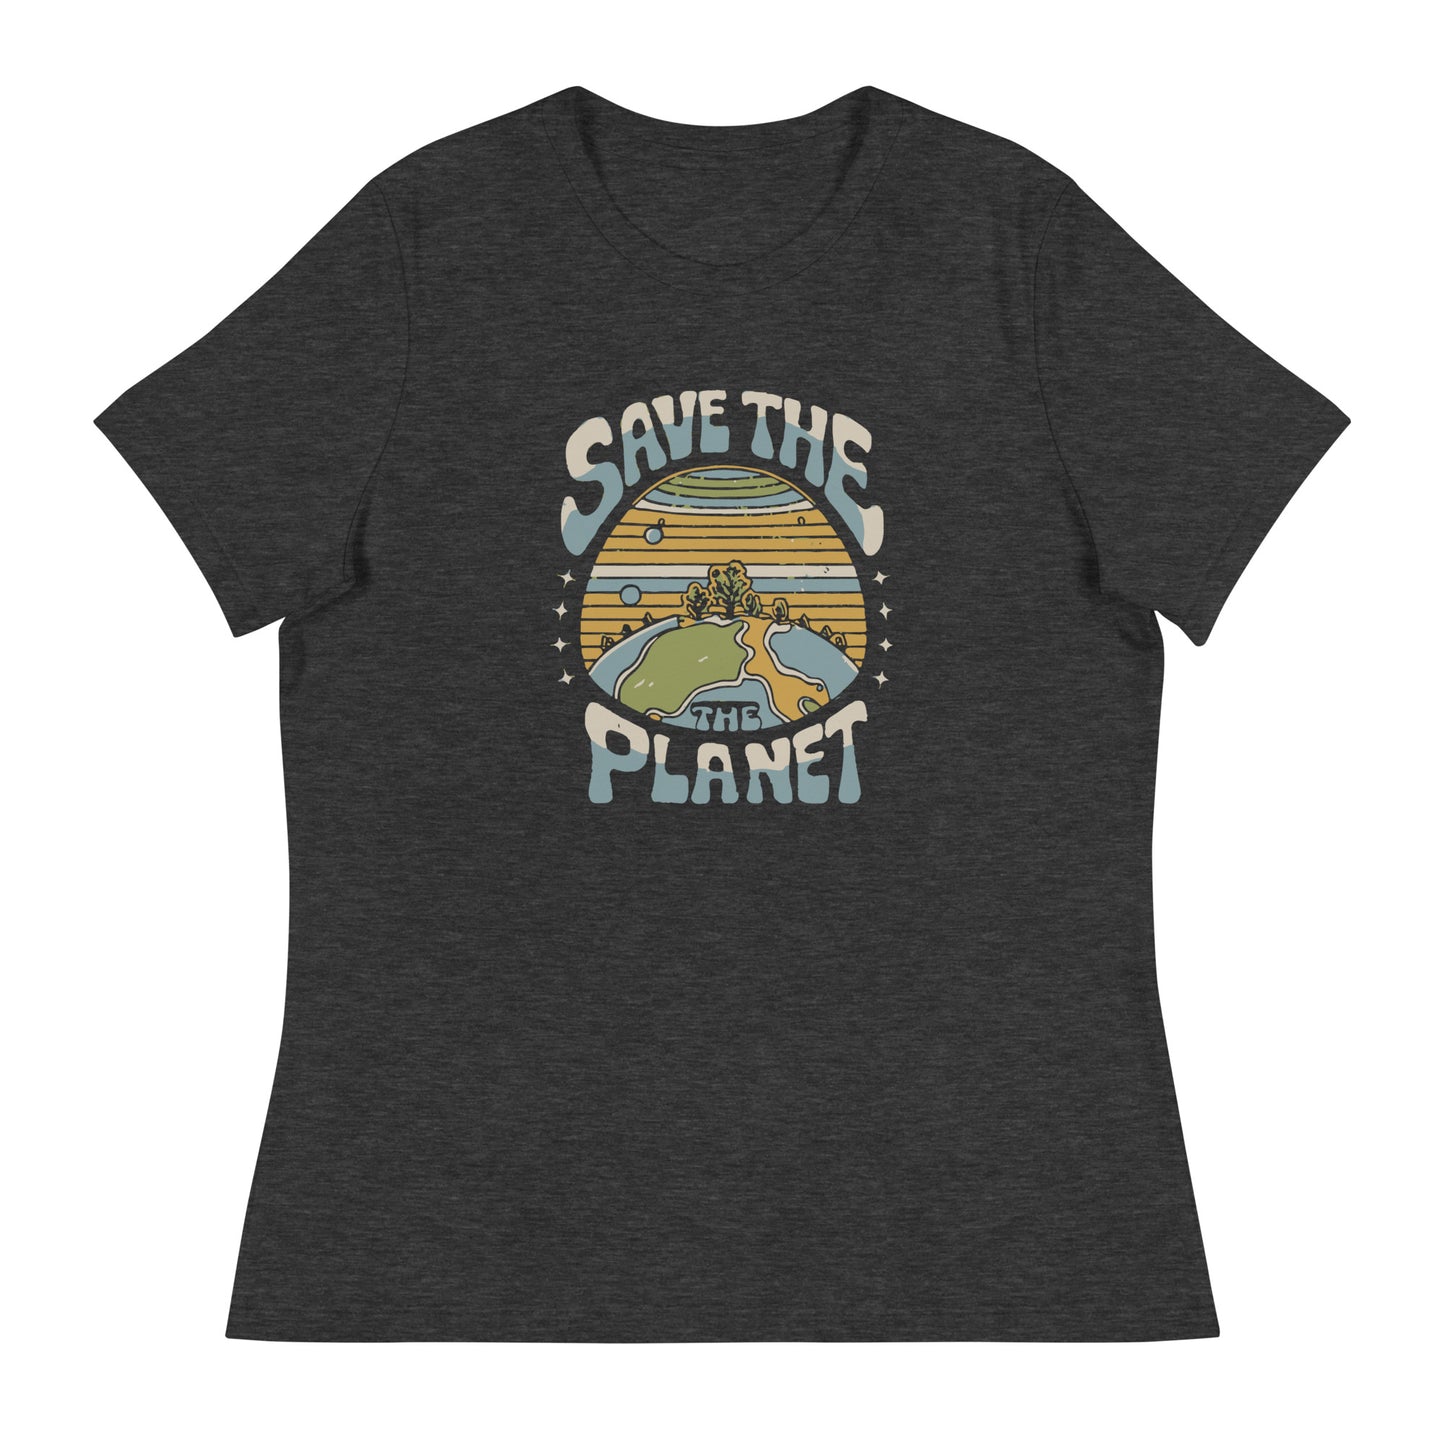 Join the Movement in Comfort: "Save the Planet" T-Shirt, Super Soft & Relaxed